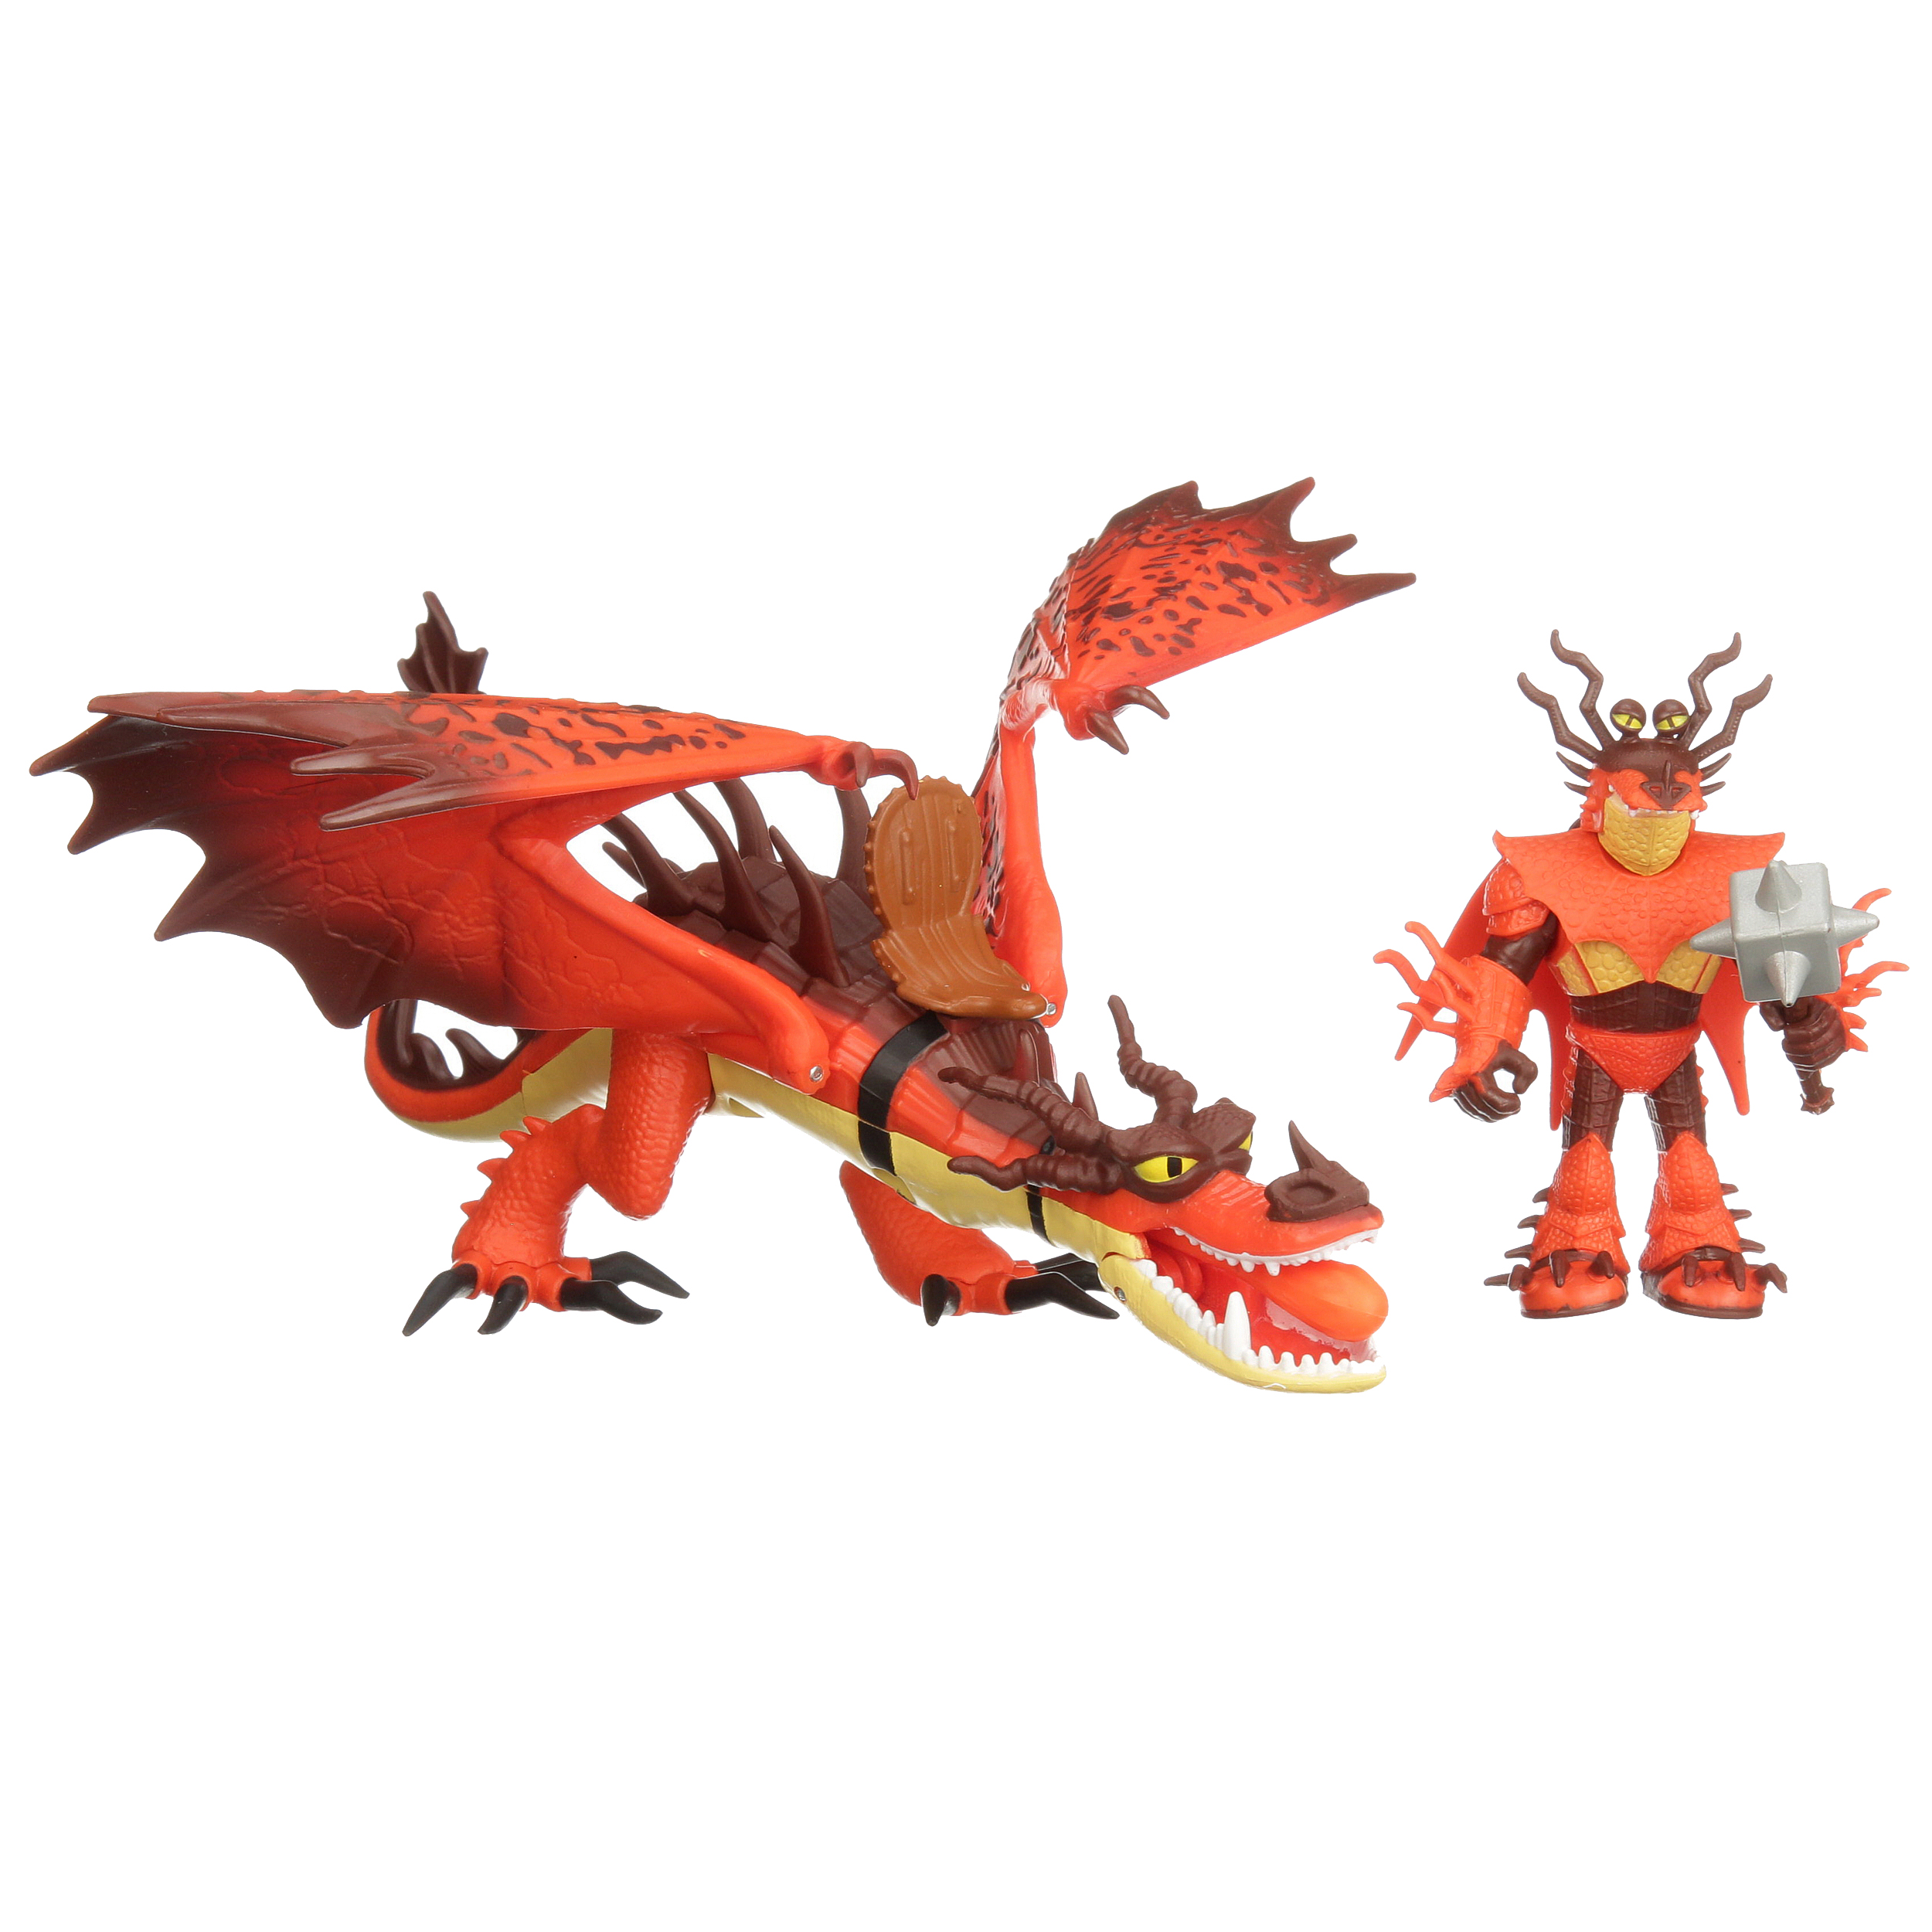 DreamWorks Dragons, Hookfang and Snotlout, Dragon with Armored Viking Figure, for Kids Aged 4 and Up - image 6 of 7